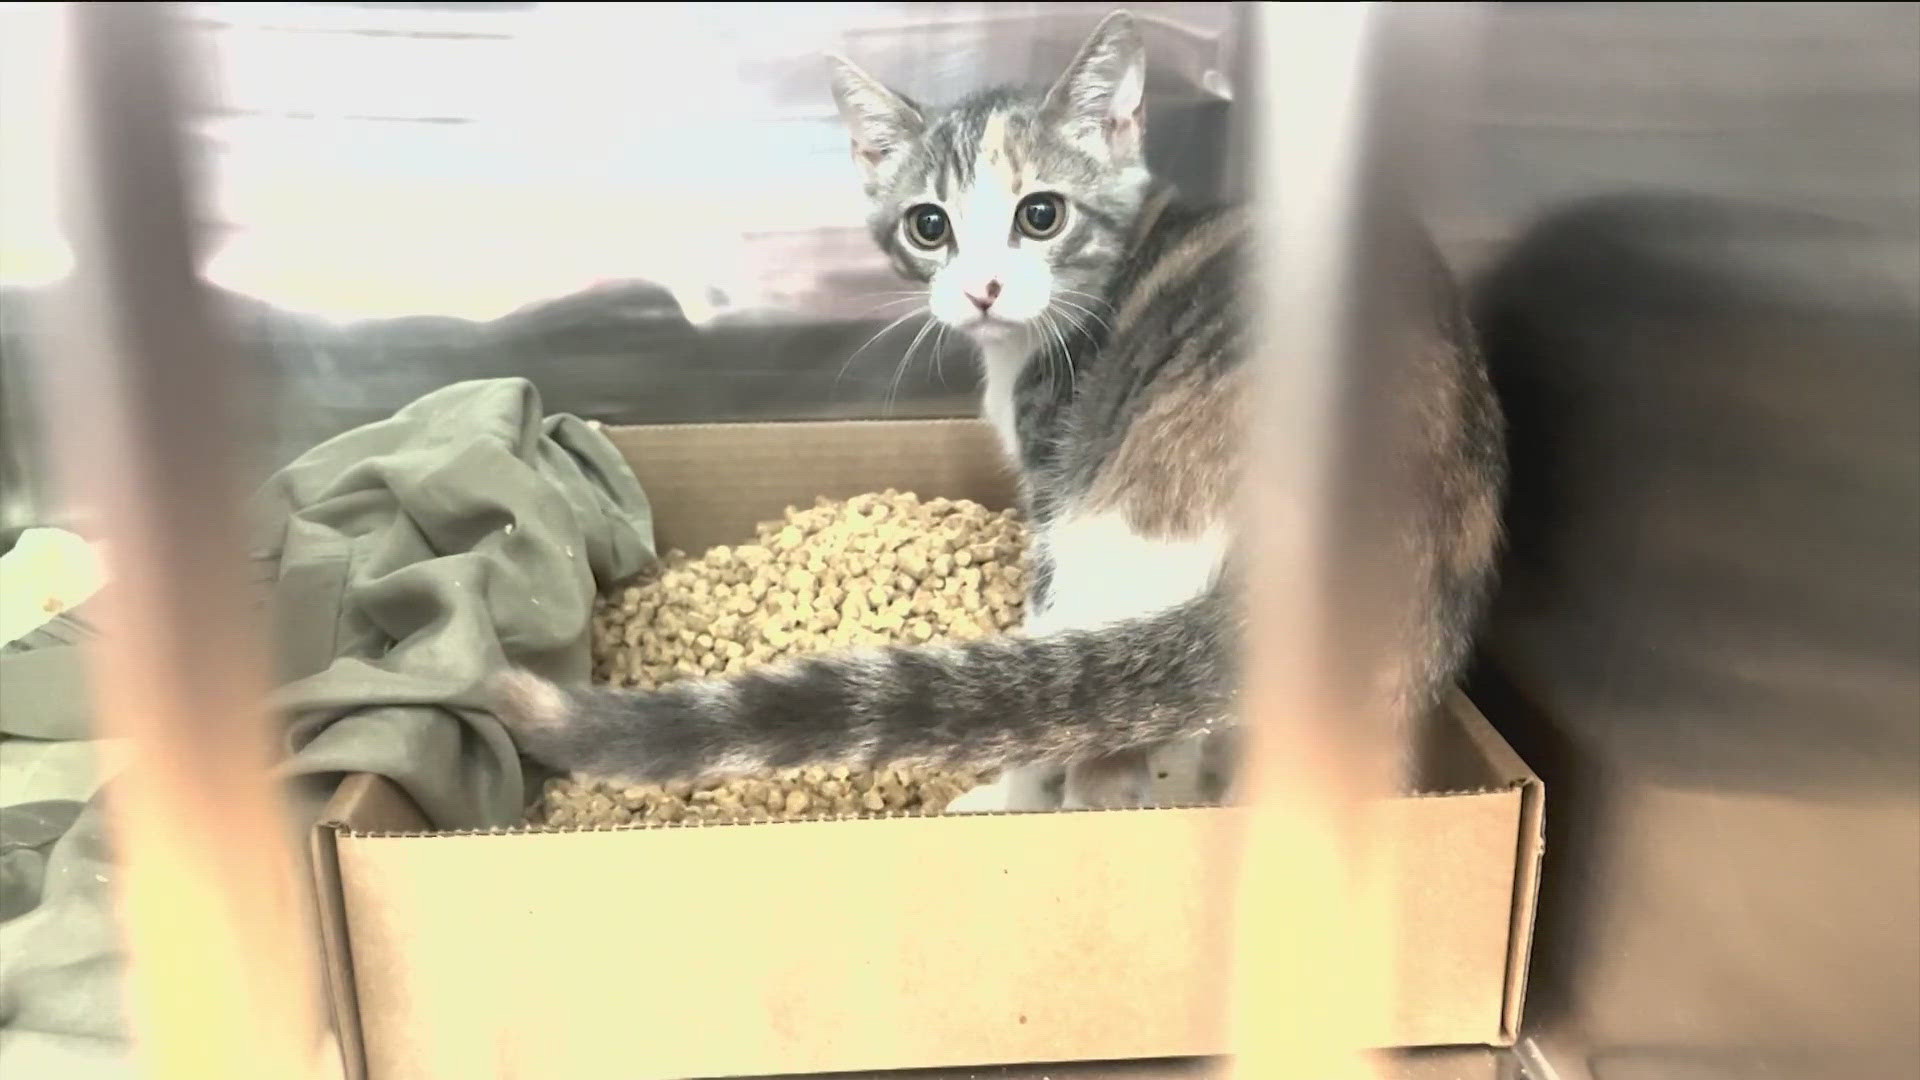 The shelter will not accept new animals until its current numbers drop and more spaces become available.